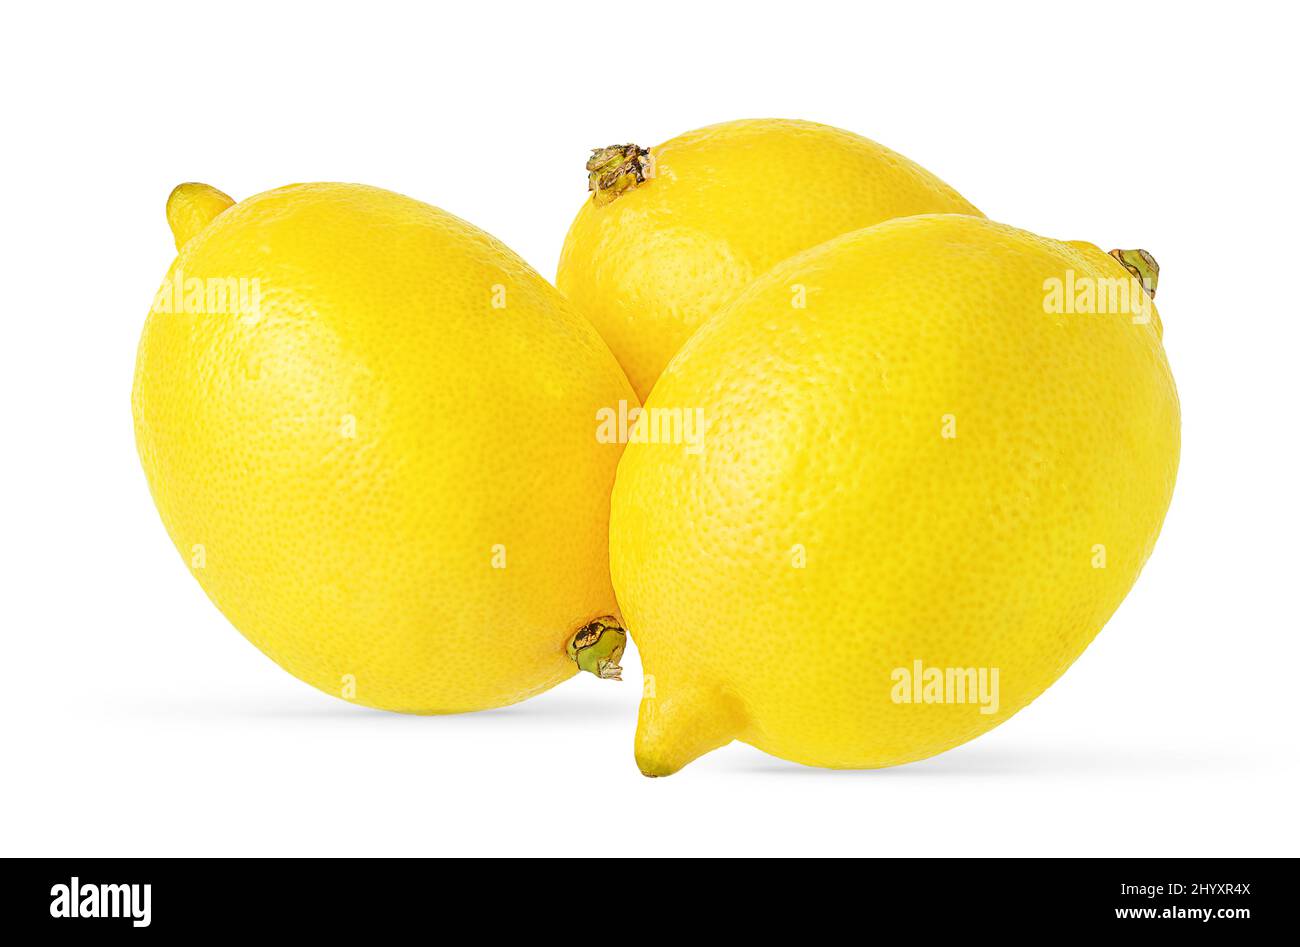 Three lemons isolated on white background with clipping path. Stock Photo